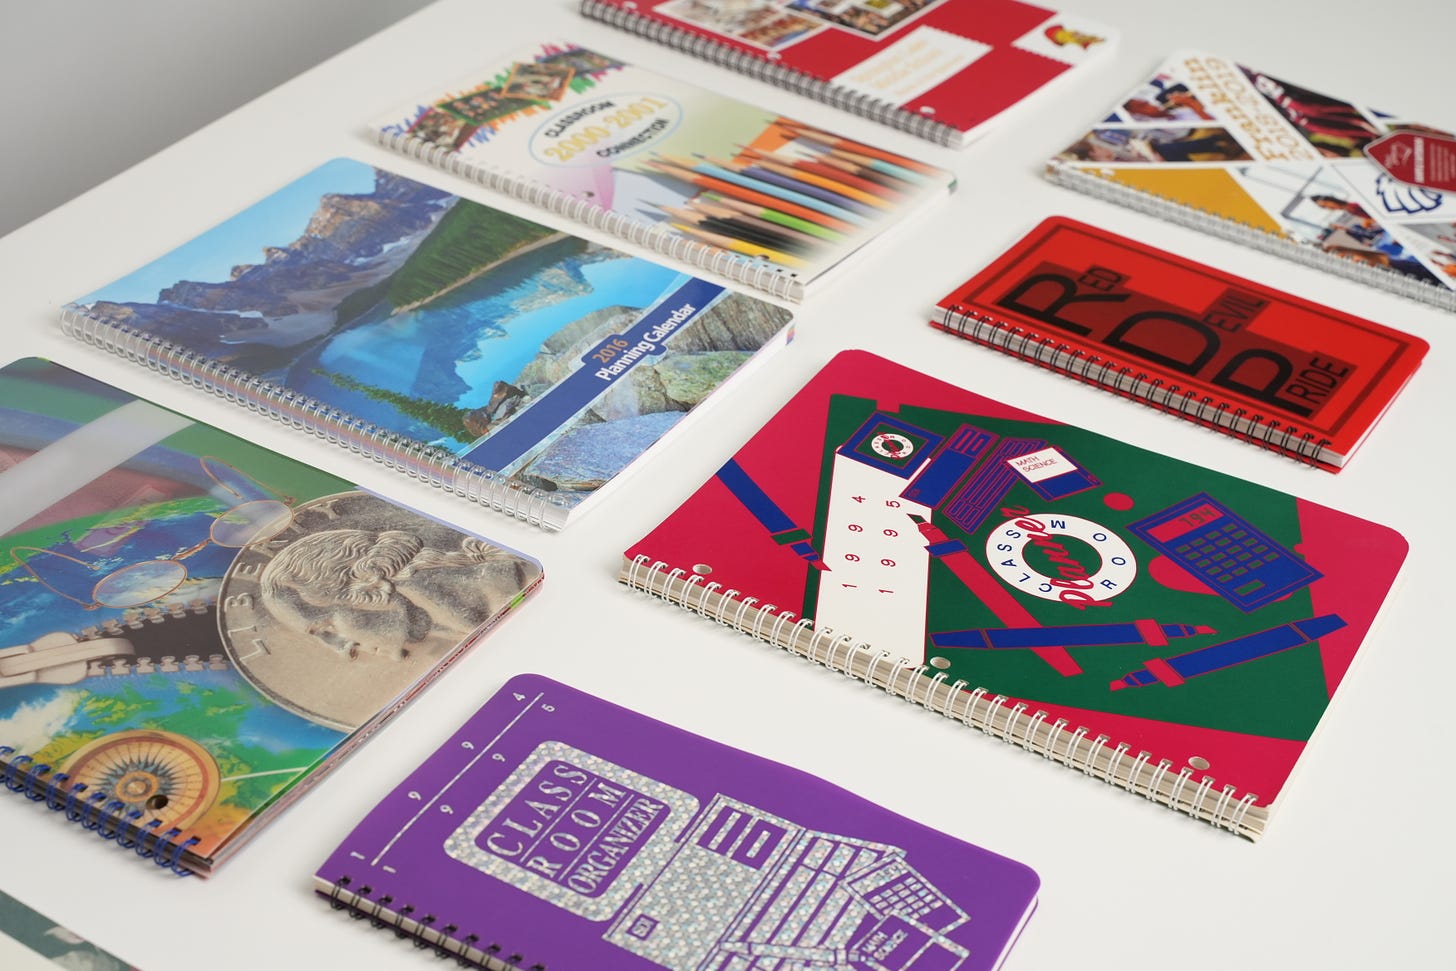 image of several planners, including those from 1994-1995, 2016, 2000-2001, and more